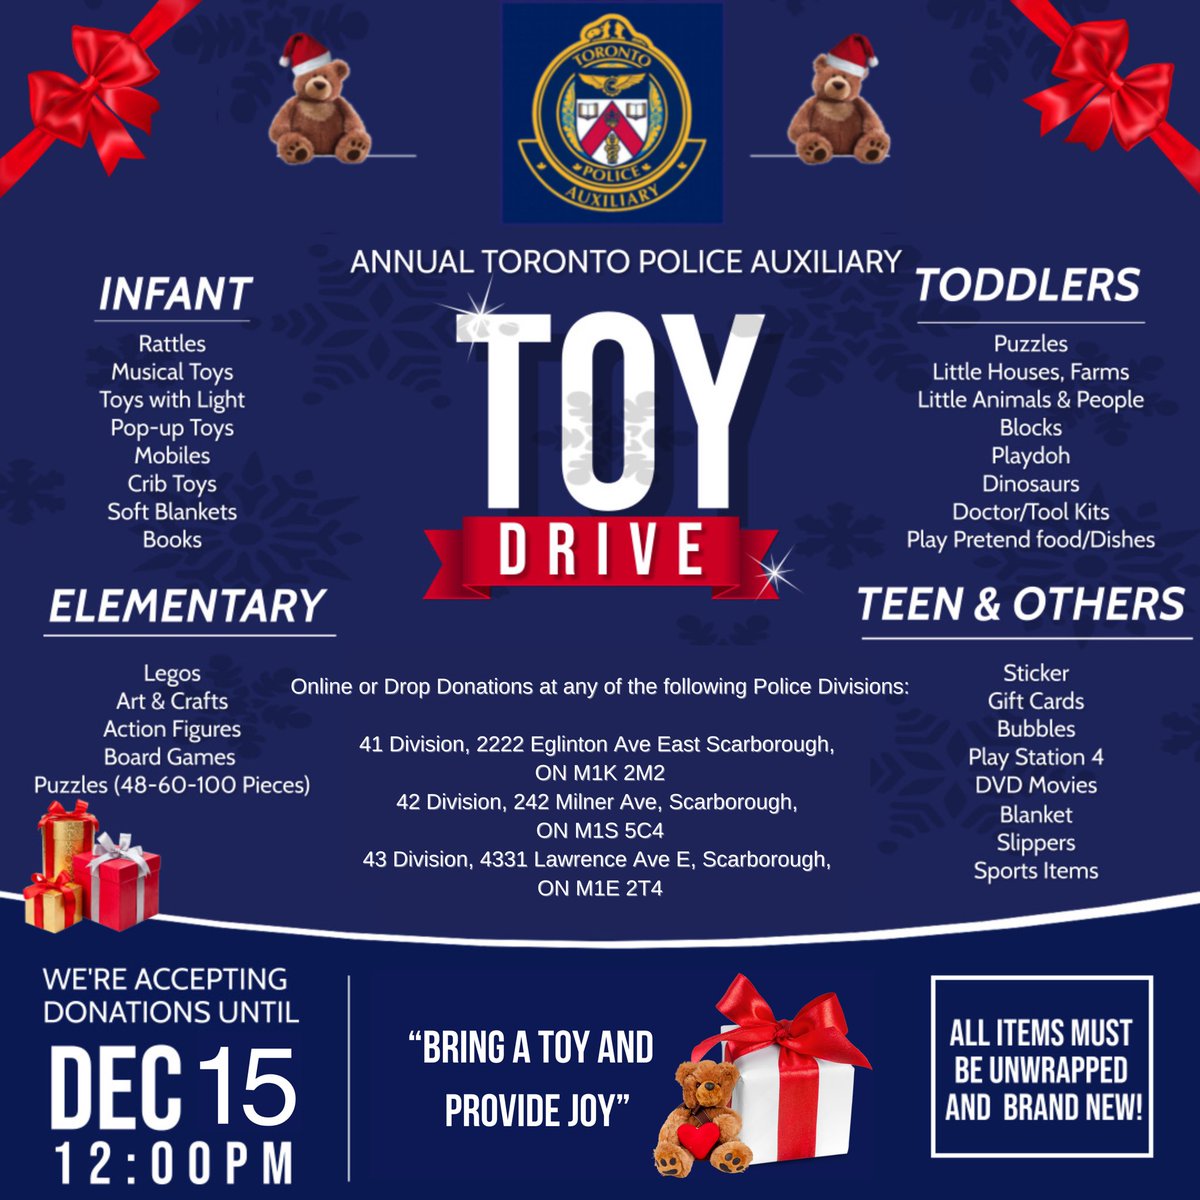 Our 4 District Auxiliary Toy Drive is officially underway for the 30th year! Please drop off a new unwrapped toy to 41, 42 or 43 Division. There is no greater feeling than seeing the smile on a child’s face who may not otherwise receive a gift this season.